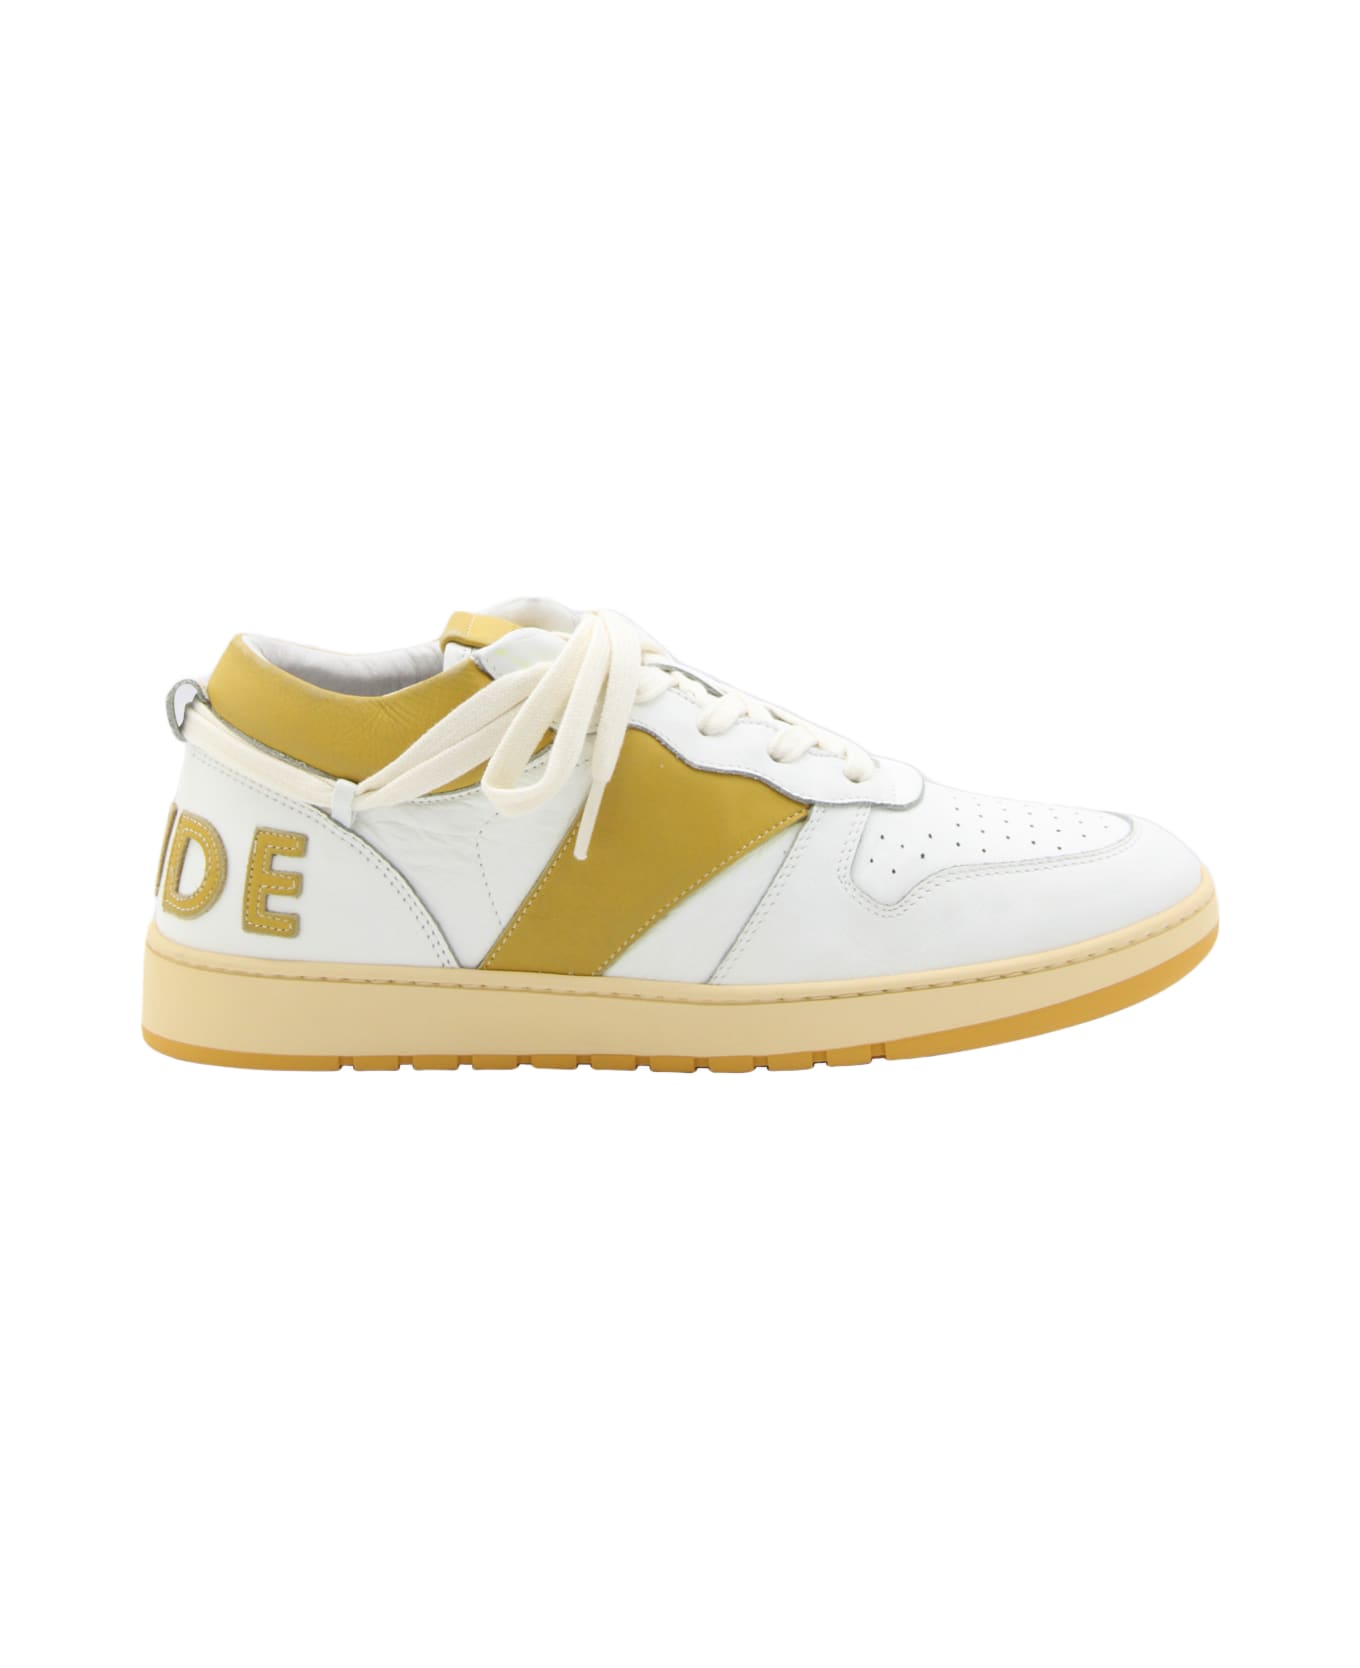 Rhude White And Mustard Leather Sneakers - WHITE/MUSTARD